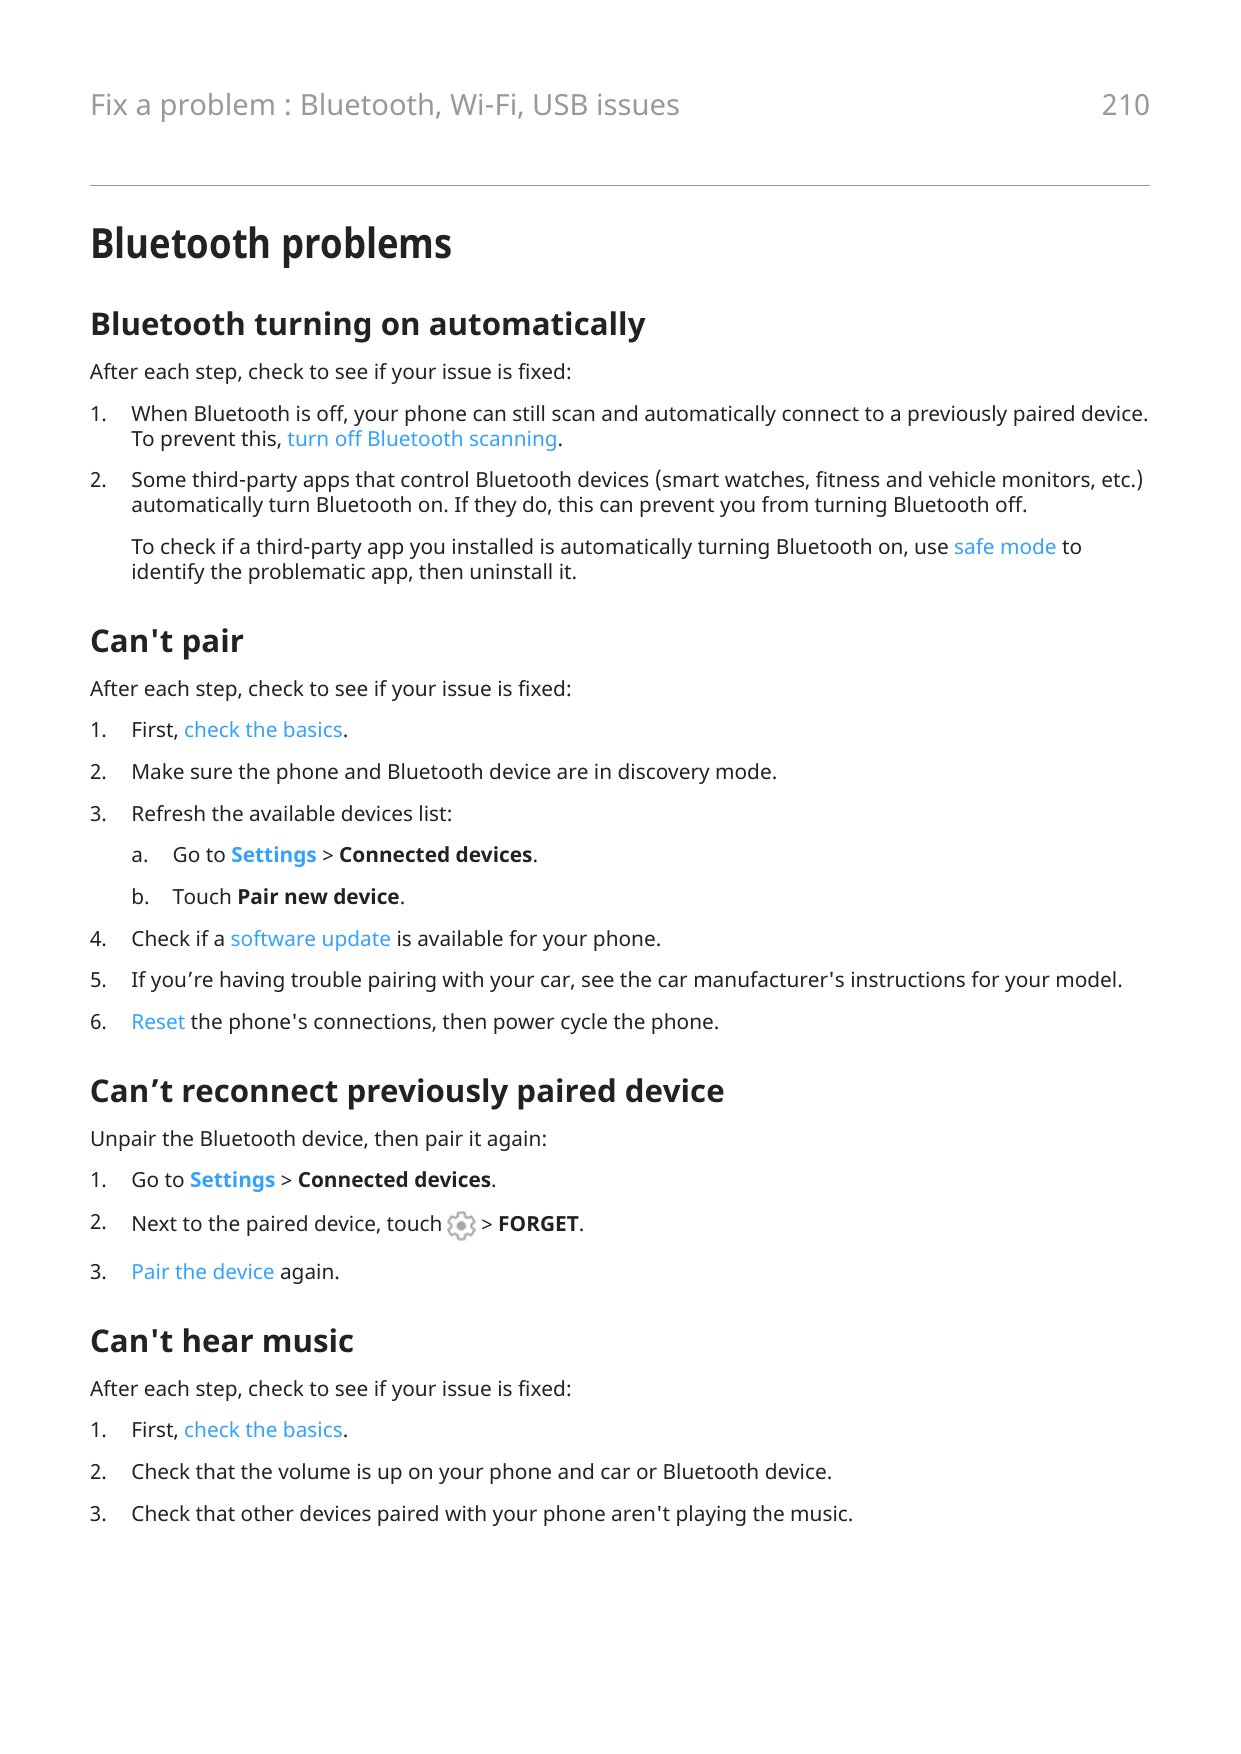 Fix a problem : Bluetooth, Wi-Fi, USB issues210Bluetooth problemsBluetooth turning on automaticallyAfter each step, check to see